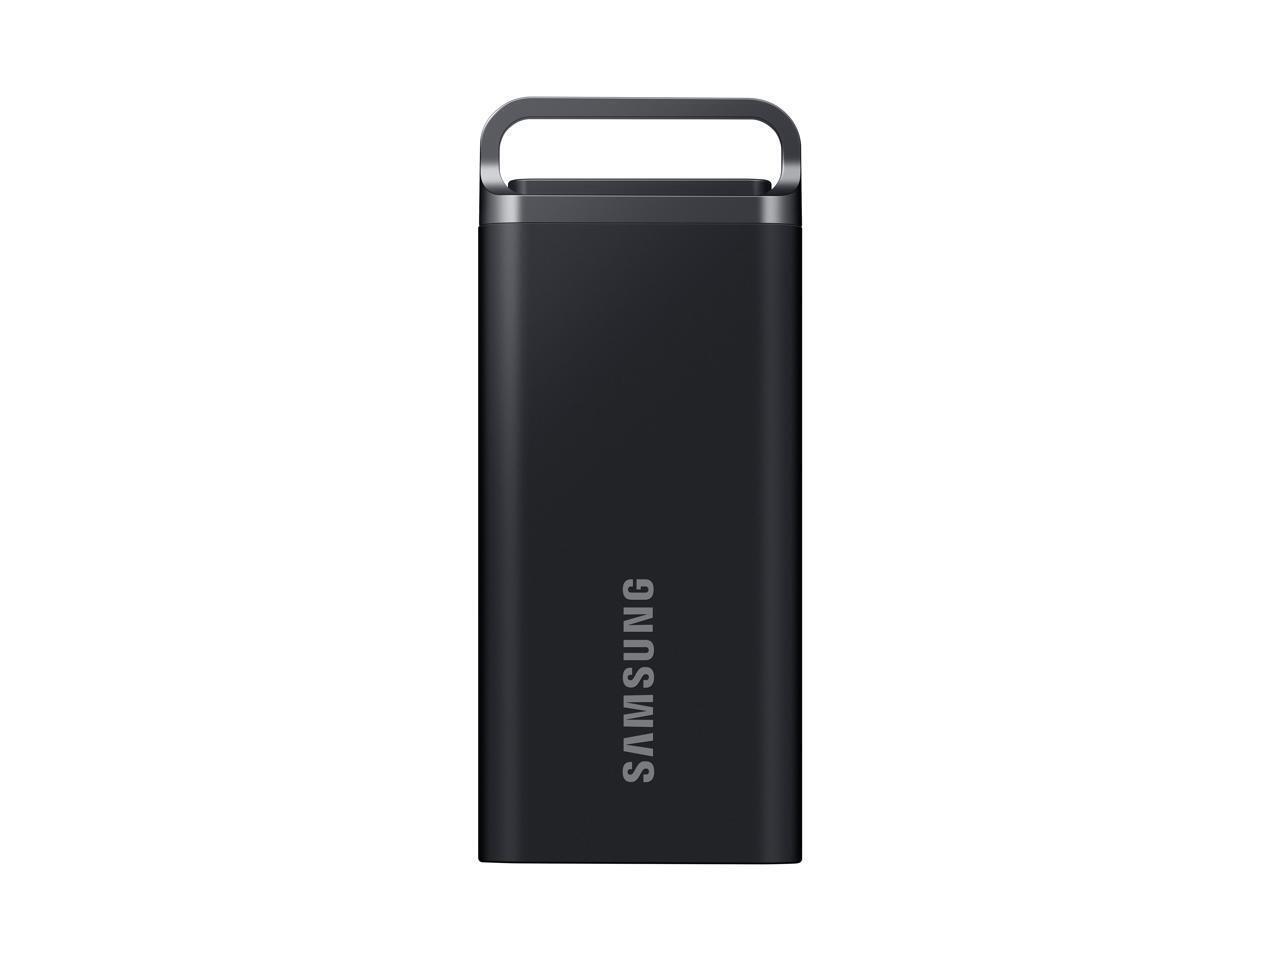 SAMSUNG T5 EVO Portable SSD 8TB Black, Up-to 460MB/s,  USB 3.2 Gen 1, Ideal use